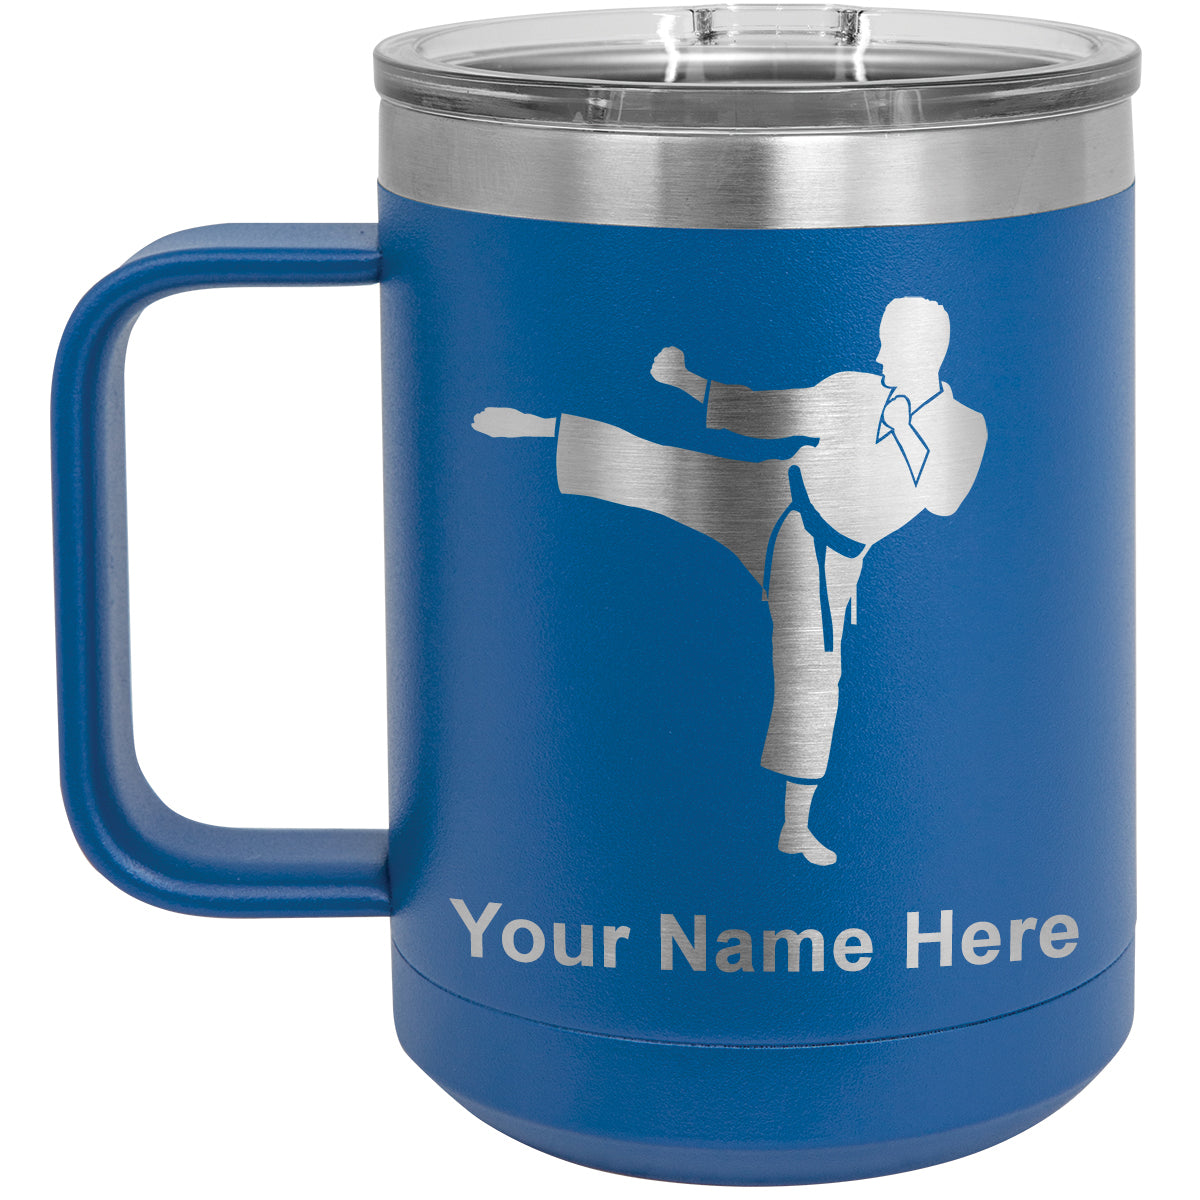 15oz Vacuum Insulated Coffee Mug, Karate Man, Personalized Engraving Included